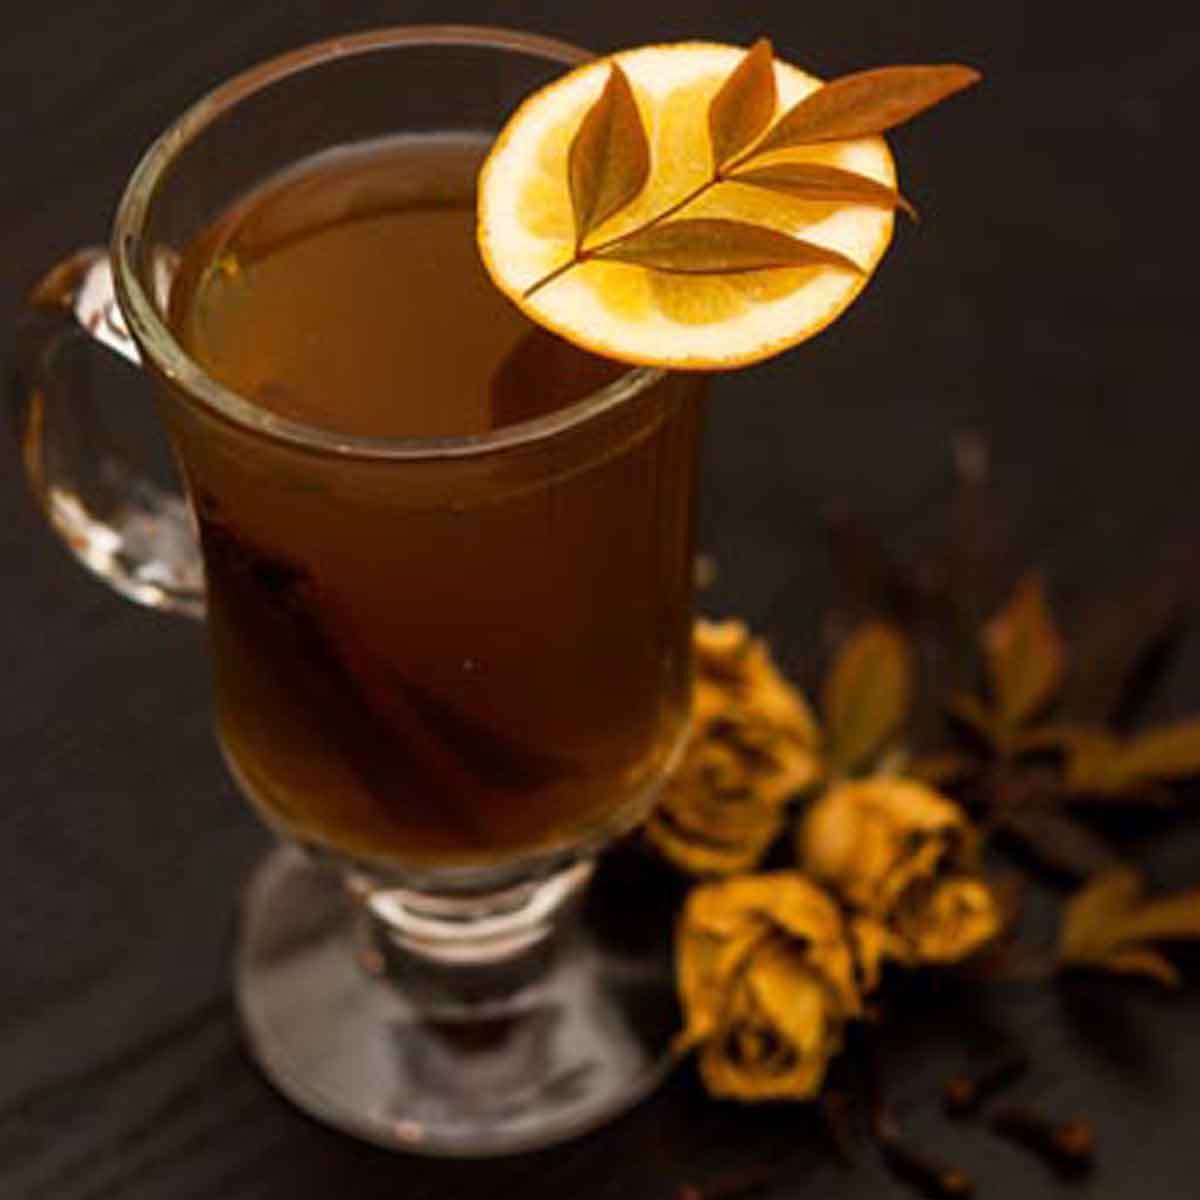 A mug of hot toddy, garnished with an orange slice, topped with a small lead, with a few dry roses and leaves at its base.